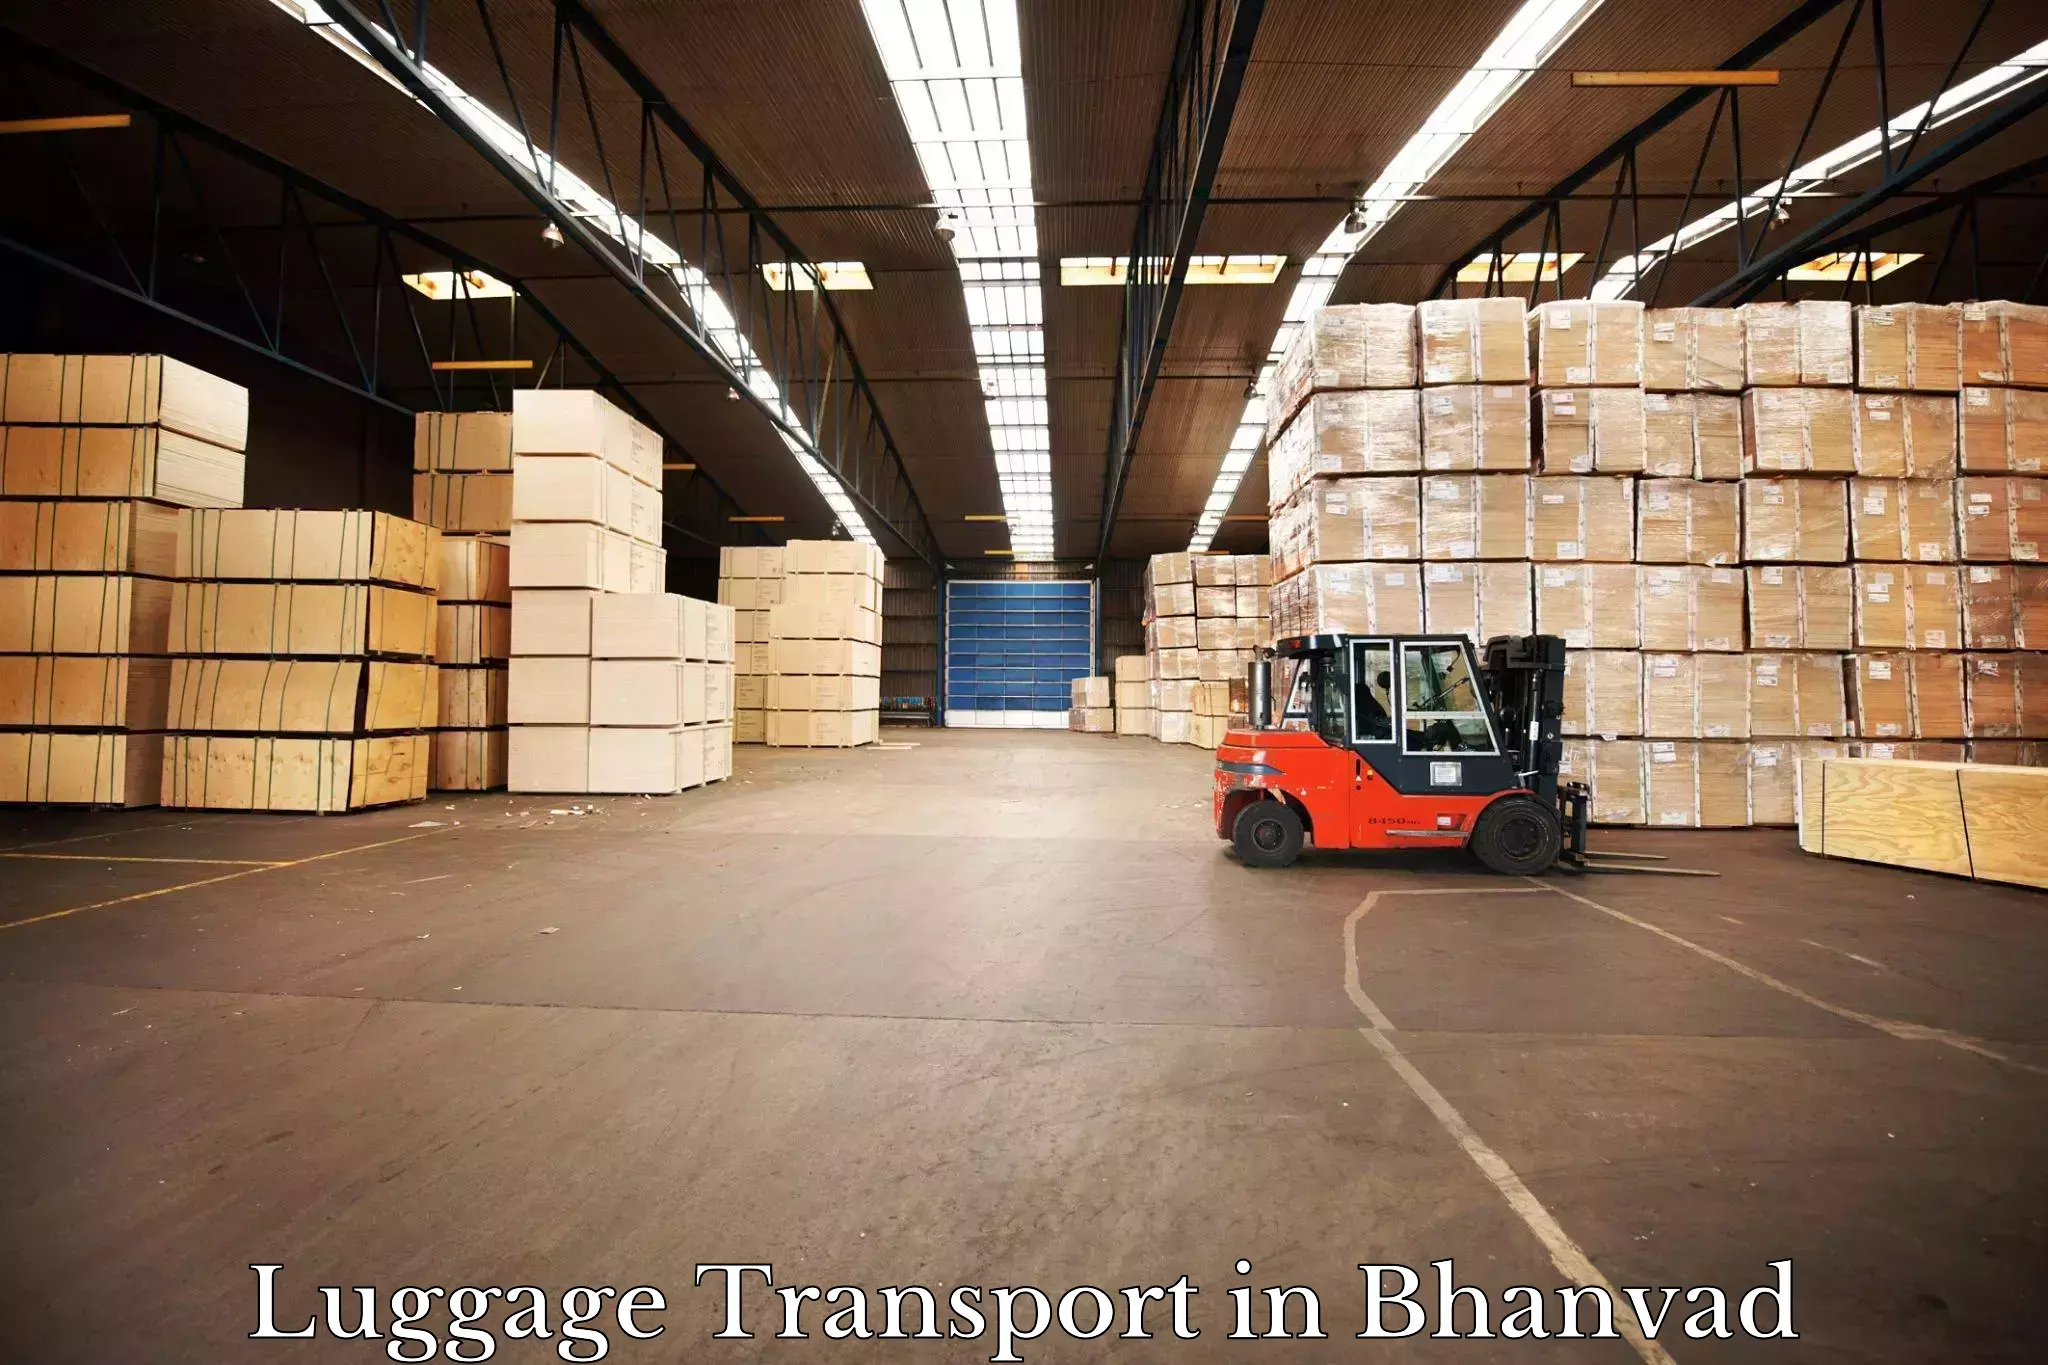 Luggage delivery system in Bhanvad